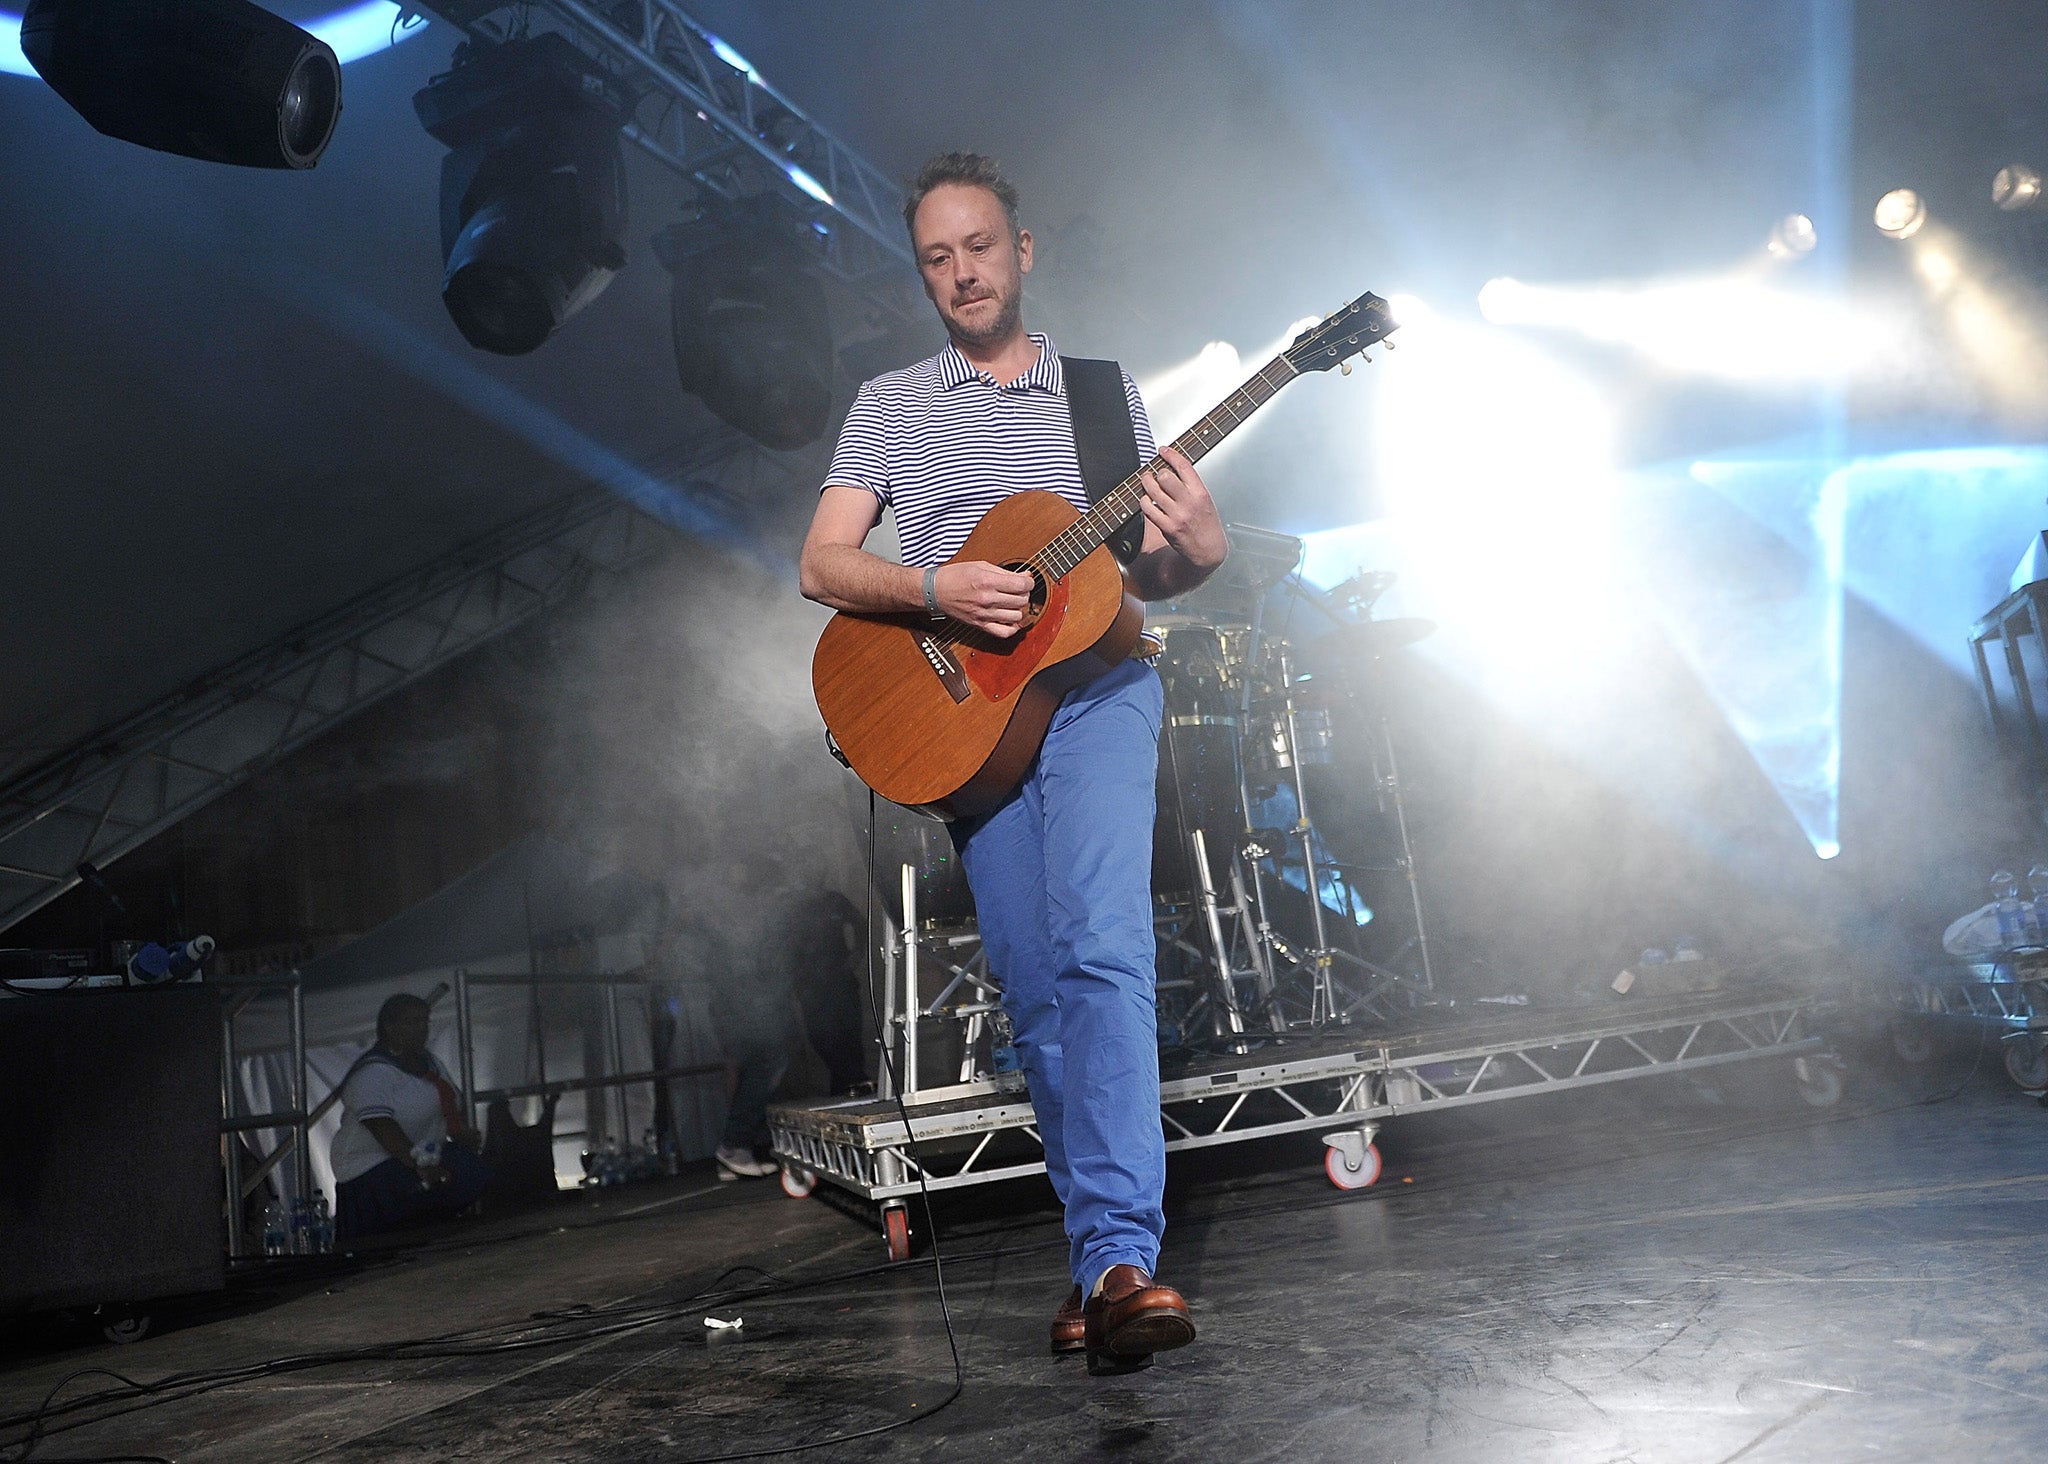 Simon Ratcliffe of Basement Jaxx performs on stage in Chiswick, west London